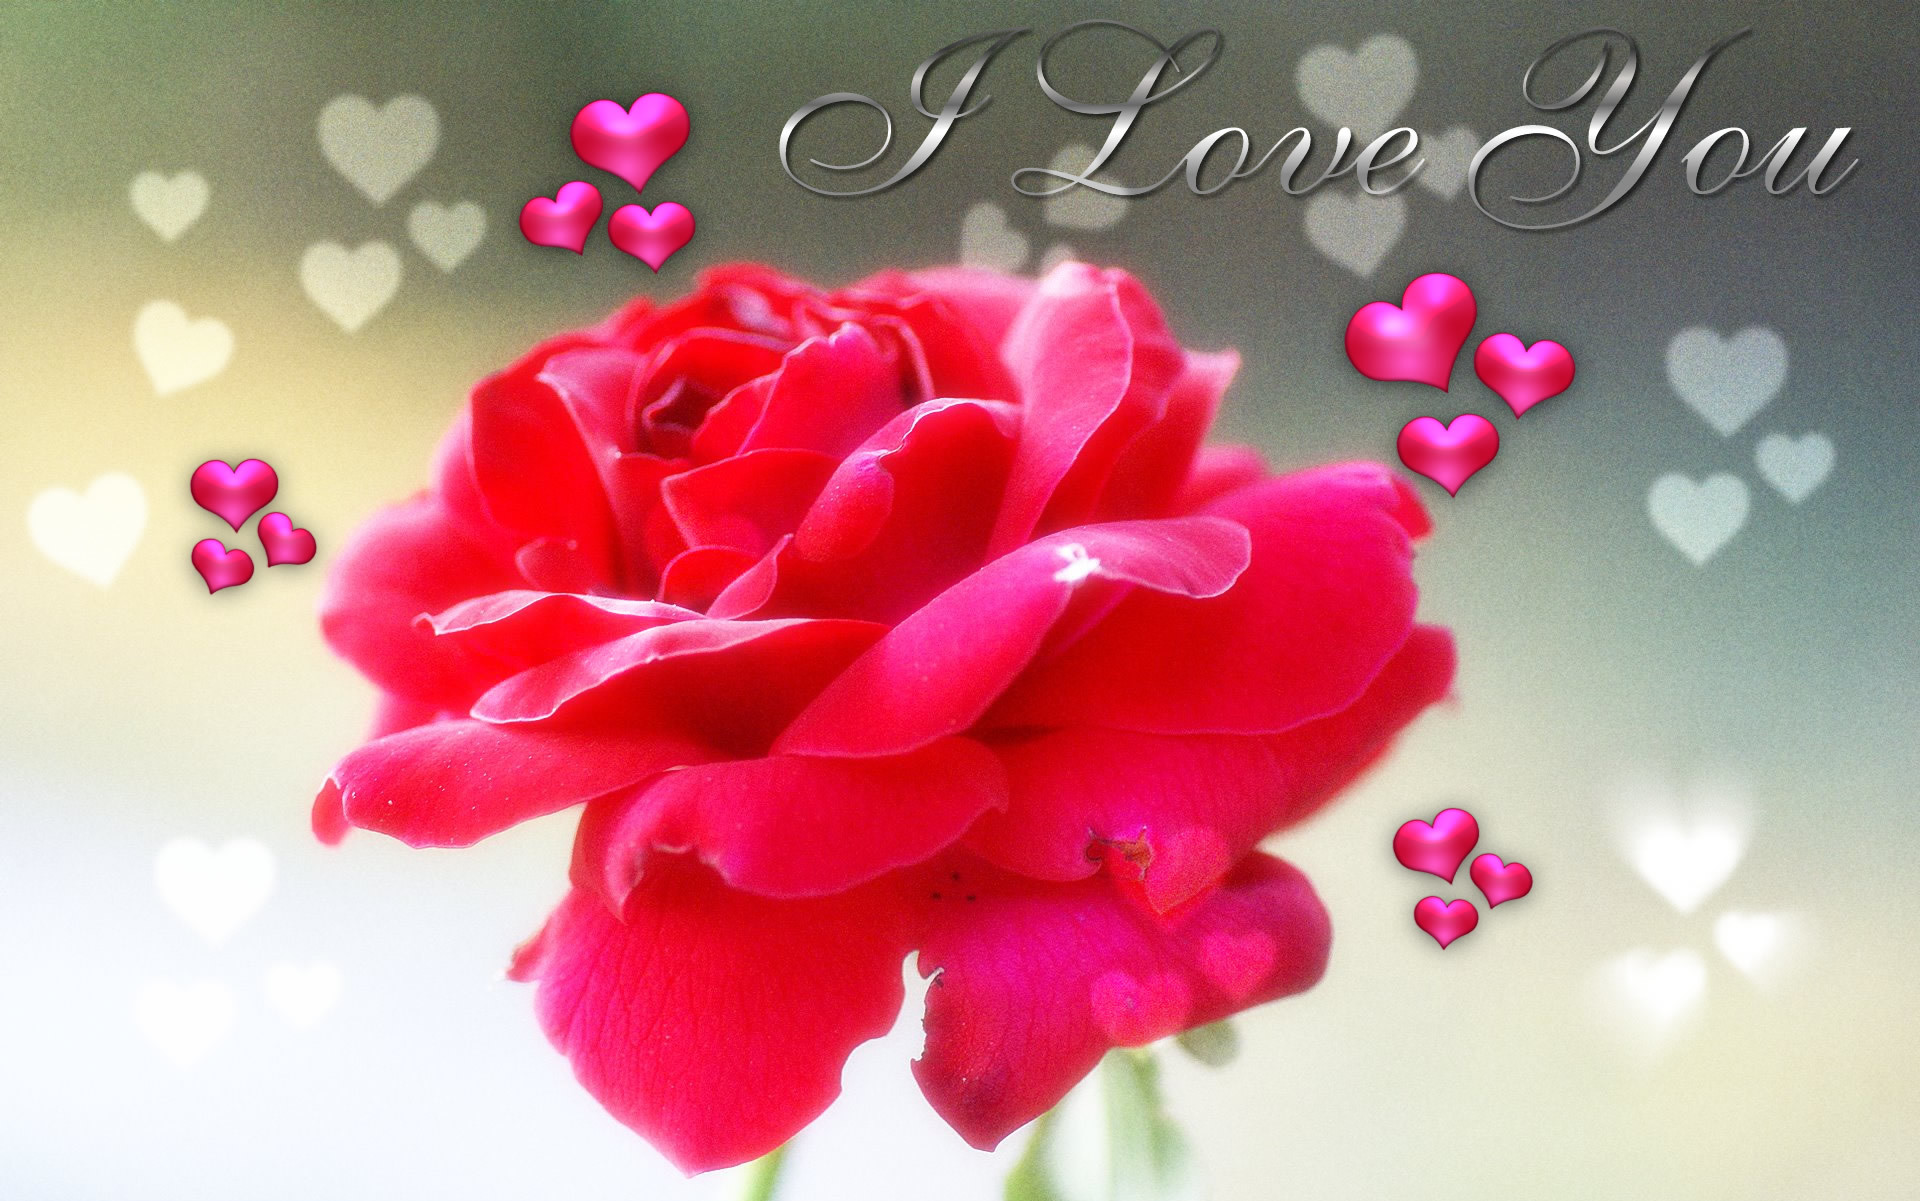 Valentine Weeks Special Top 500 Most Beautiful Rose Day Love Wallpapers Pictures Images Photos Greetings Quotes Wishes Ecard Of Rose Day Part 1 1920x1201